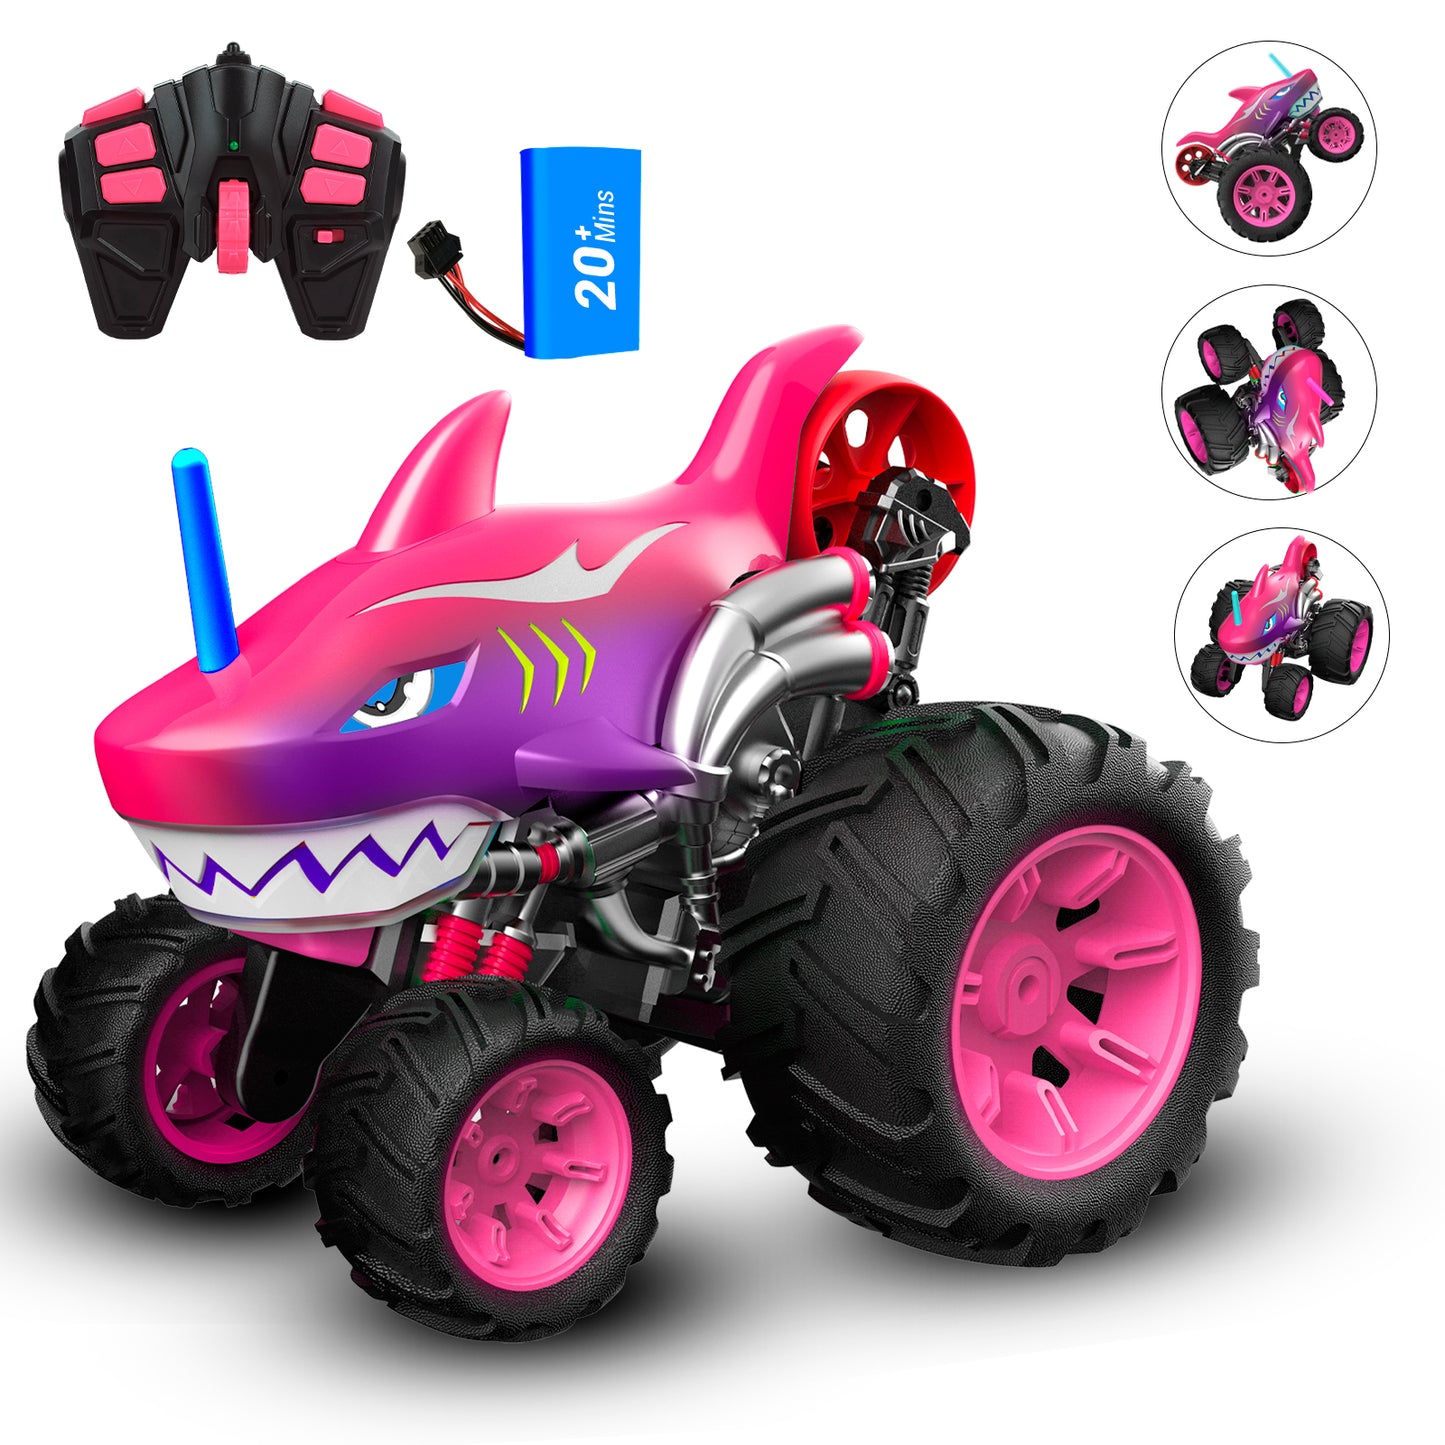 Wisairt Remote Control Monster Truck,1:16 4WD Shark RC Car with 360 Degress Rotation Upright Stunt Car Toys for Kids Boys Girls Age 3+